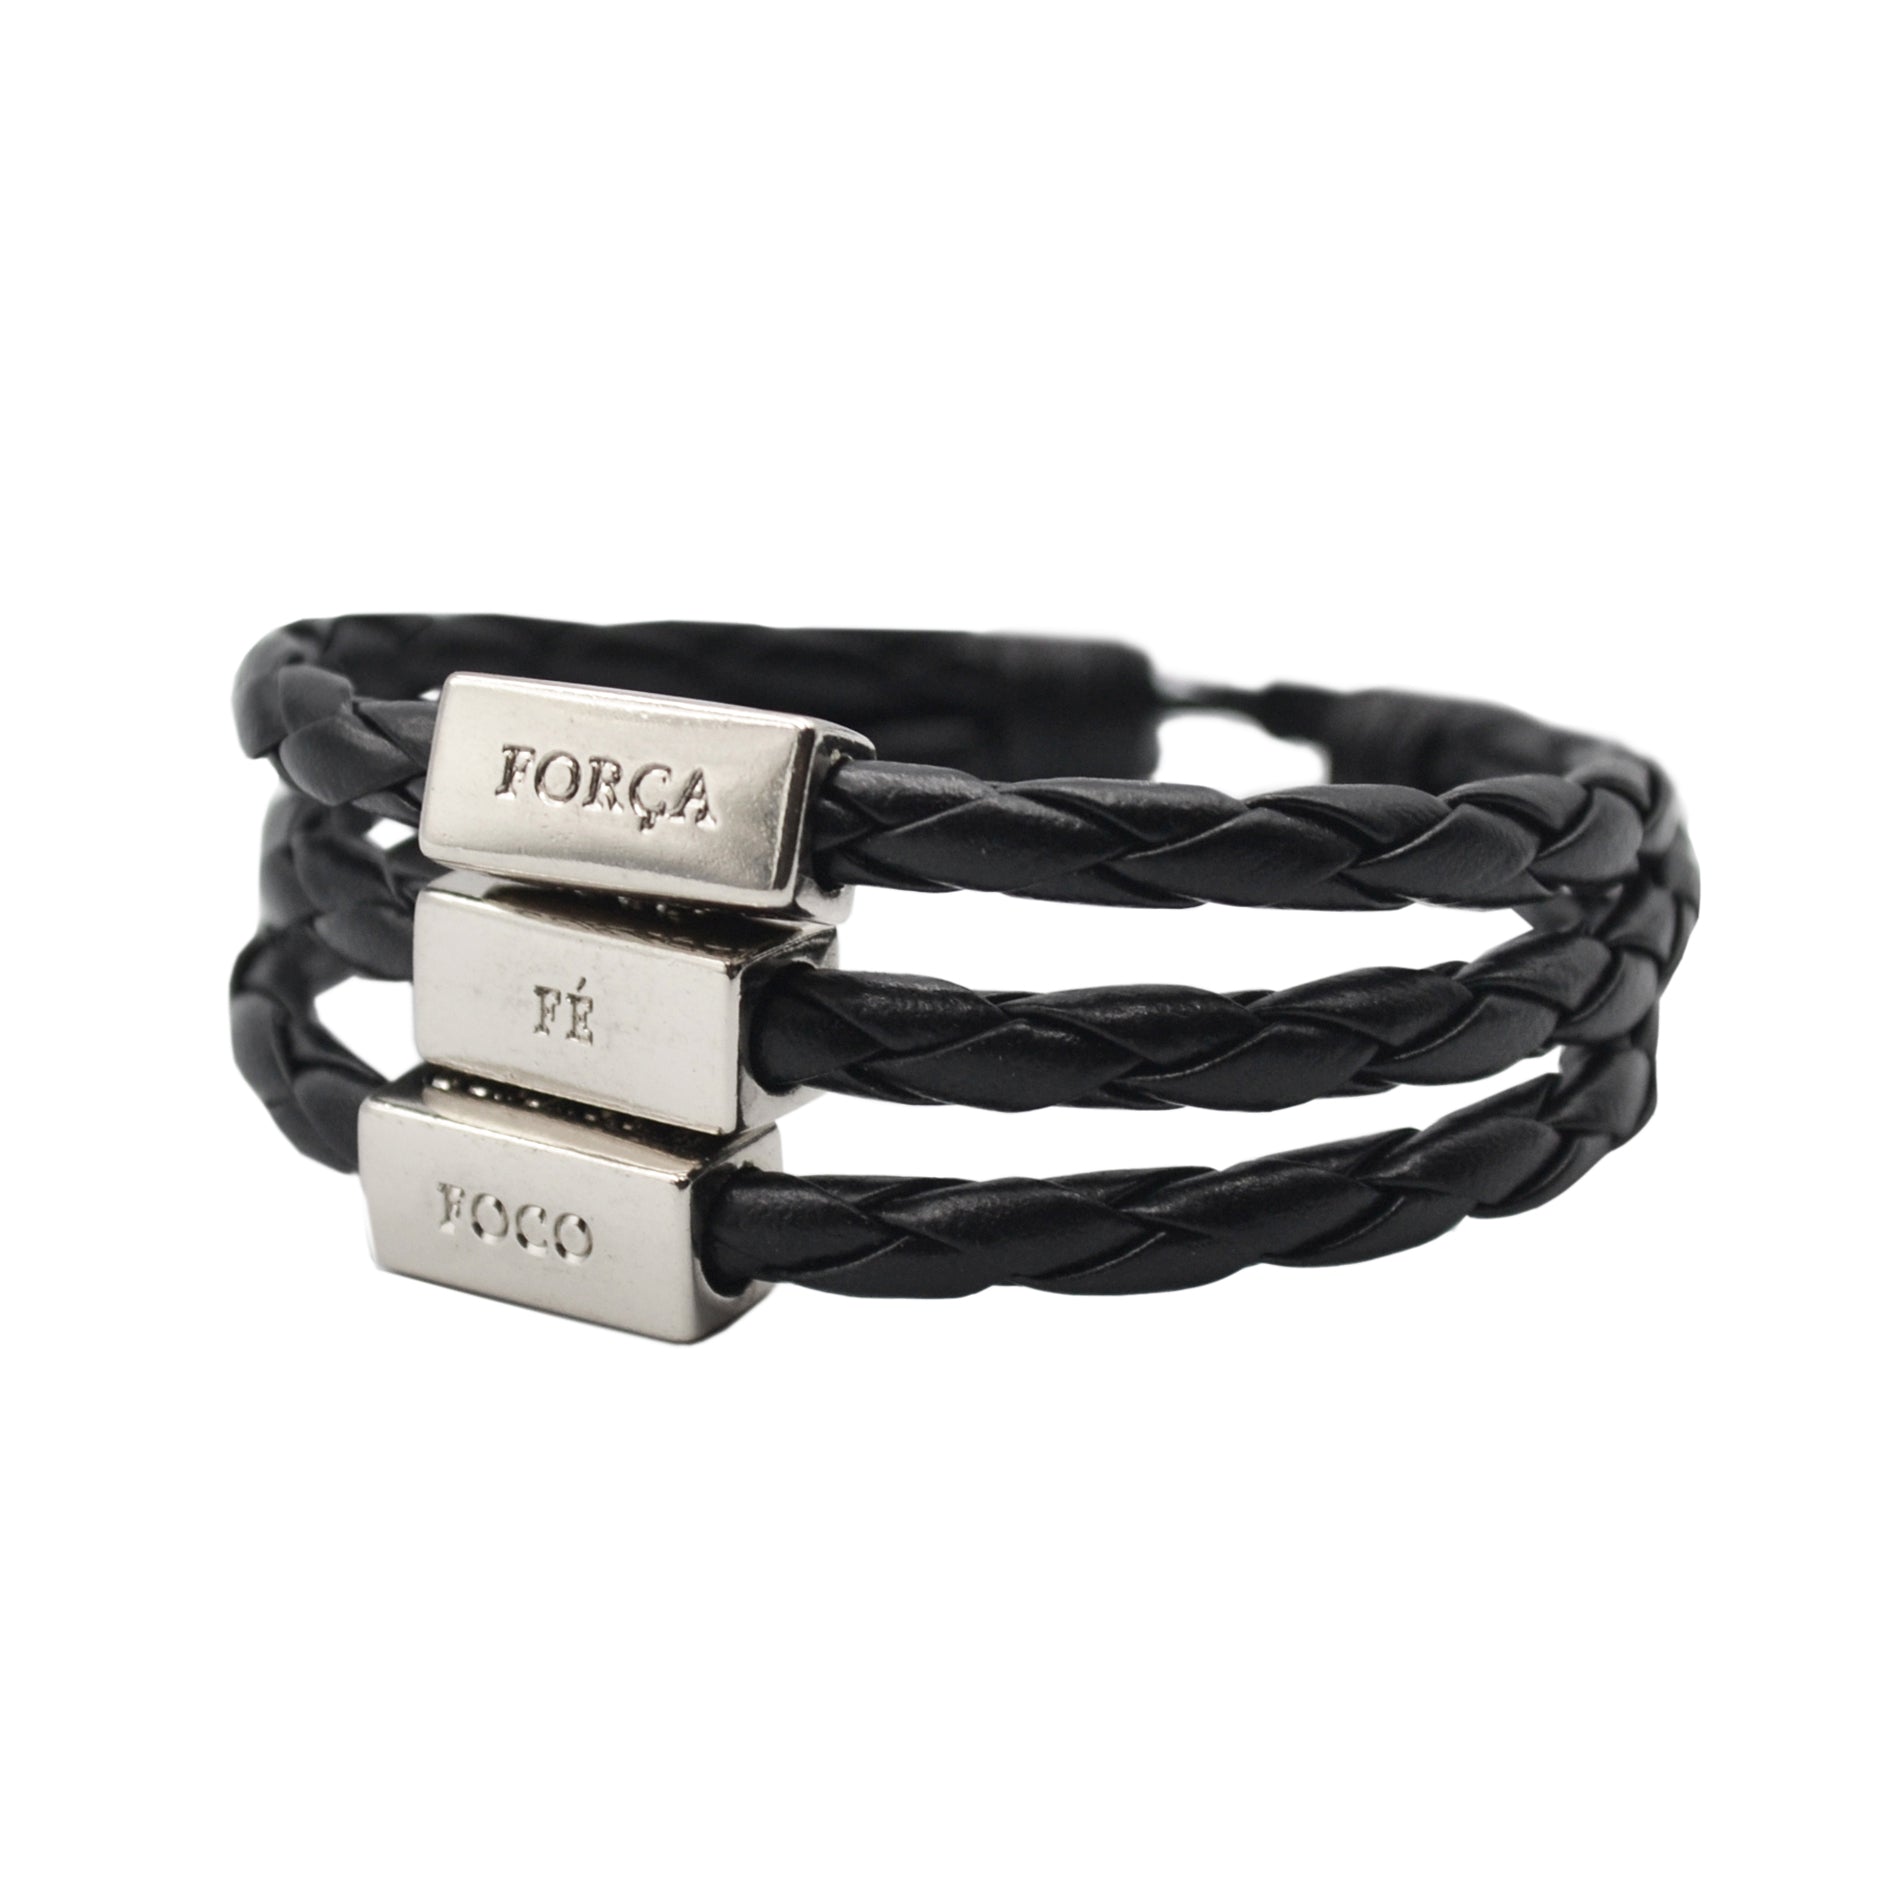 Men's Bracelet Black Leather Silver Adjustable with words of Focus, Strength, Faith, & Courage in Portuguese - Unisex Man's Bracelet - Male Jewelry - Pre Order